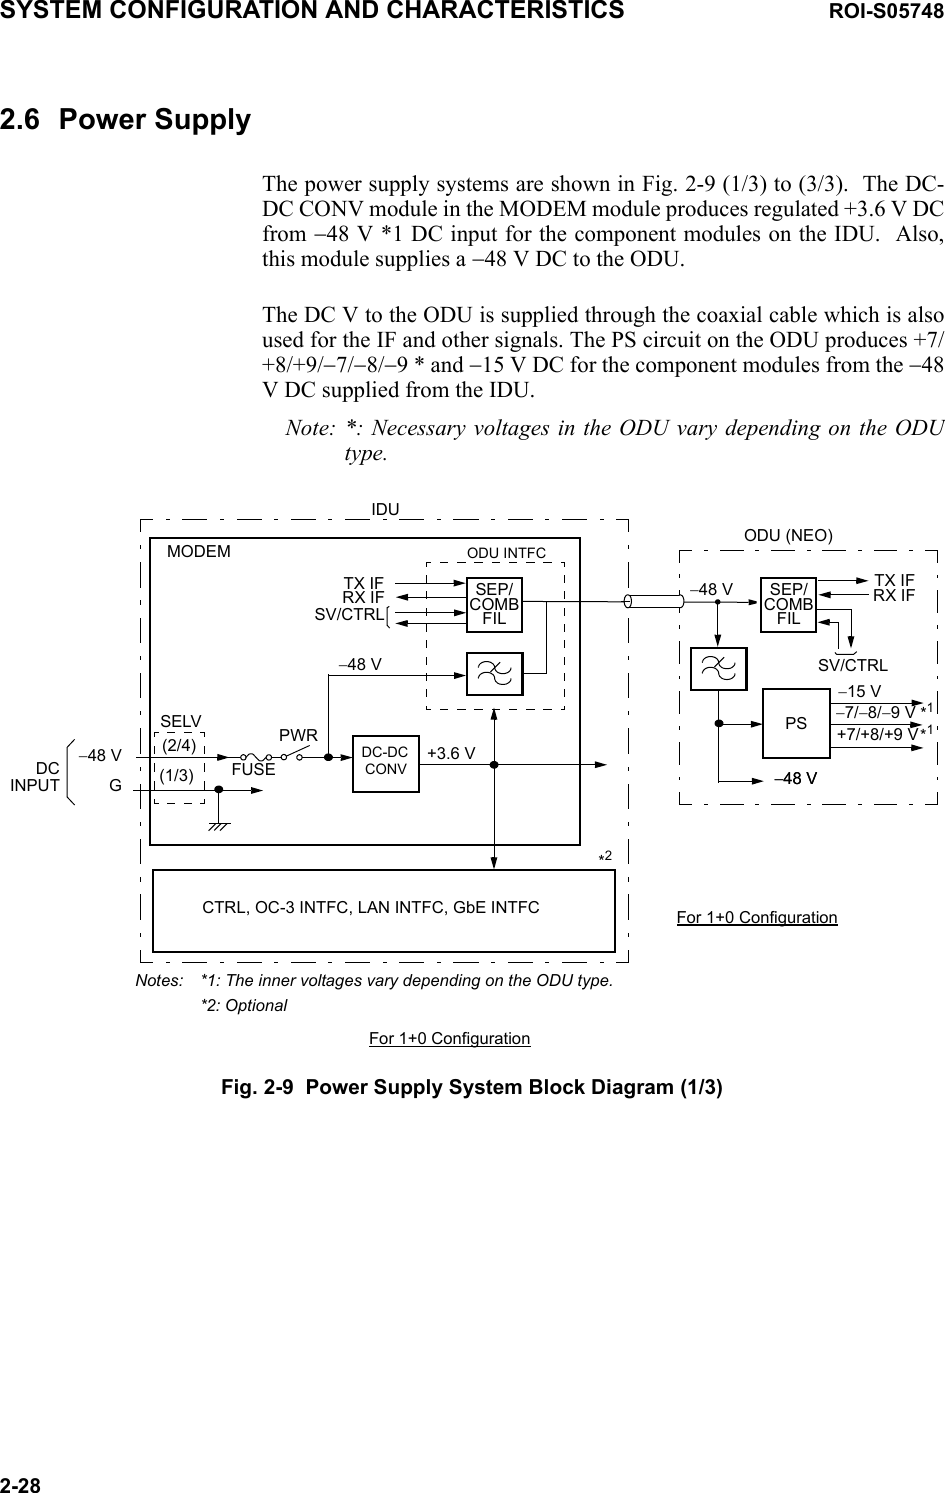 SYSTEM CONFIGURATION AND CHARACTERISTICS ROI-S057482-282.6 Power SupplyThe power supply systems are shown in Fig. 2-9 (1/3) to (3/3).  The DC-DC CONV module in the MODEM module produces regulated +3.6 V DC from −48 V *1 DC input for the component modules on the IDU.  Also, this module supplies a −48 V DC to the ODU.The DC V to the ODU is supplied through the coaxial cable which is also used for the IF and other signals. The PS circuit on the ODU produces +7/+8/+9/−7/−8/−9 * and −15 V DC for the component modules from the −48 V DC supplied from the IDU.Note: *: Necessary voltages in the ODU vary depending on the ODU type.DCINPUT (1/3)(2/4)ODU (NEO)PSSELV−48 VTX IF−15 VMODEMDC-DC IDU−48 VSEP/COMBFILCTRL, OC-3 INTFC, LAN INTFC, GbE INTFCCONVODU INTFCG−48 V SEP/COMBFILRX IFSV/CTRLTX IFRX IFSV/CTRLFUSEPWR−7/−8/−9 V+7/+8/+9 V−48 V*1*1*2Notes:  *1: The inner voltages vary depending on the ODU type.*2: OptionalFor 1+0 ConfigurationFor 1+0 Configuration+3.6 V−48 VFig. 2-9  Power Supply System Block Diagram (1/3)